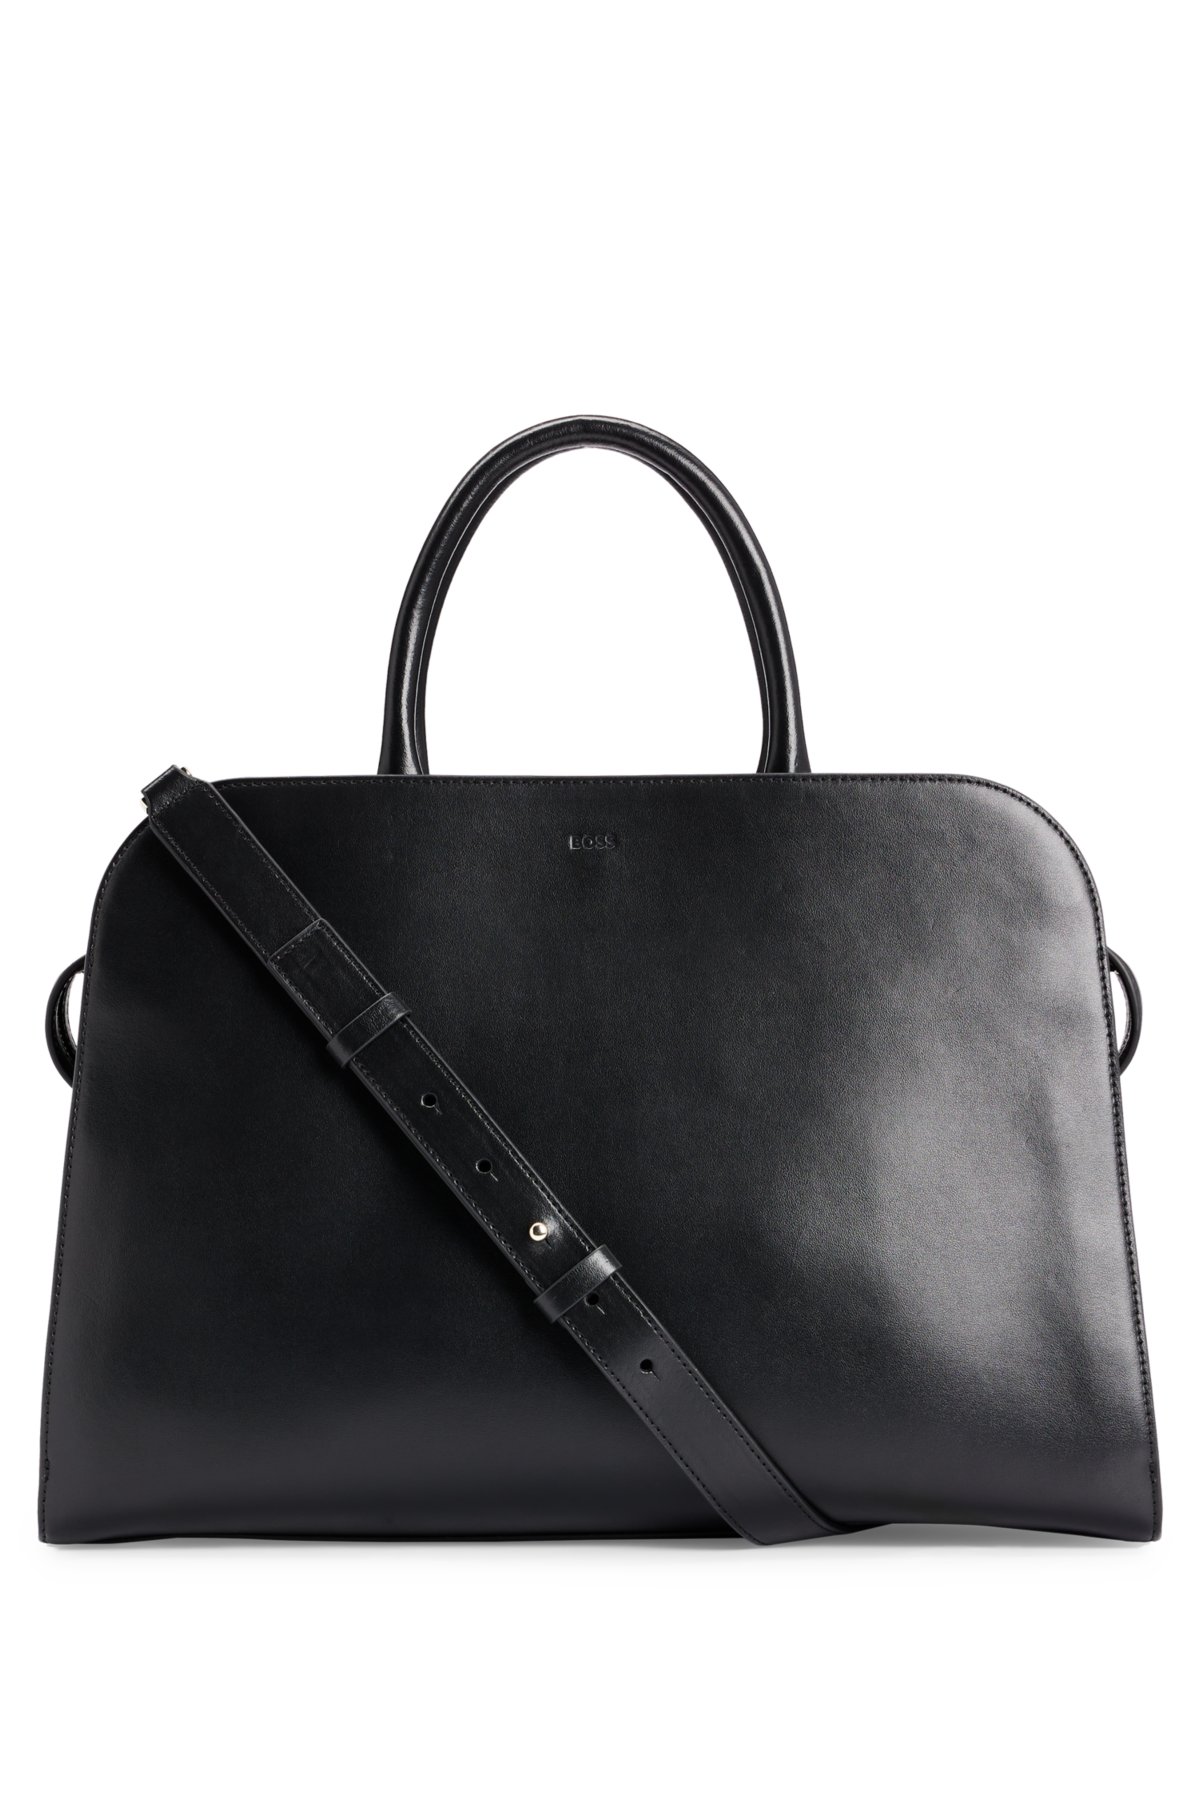 Leather tote bag with detachable pouch, Black